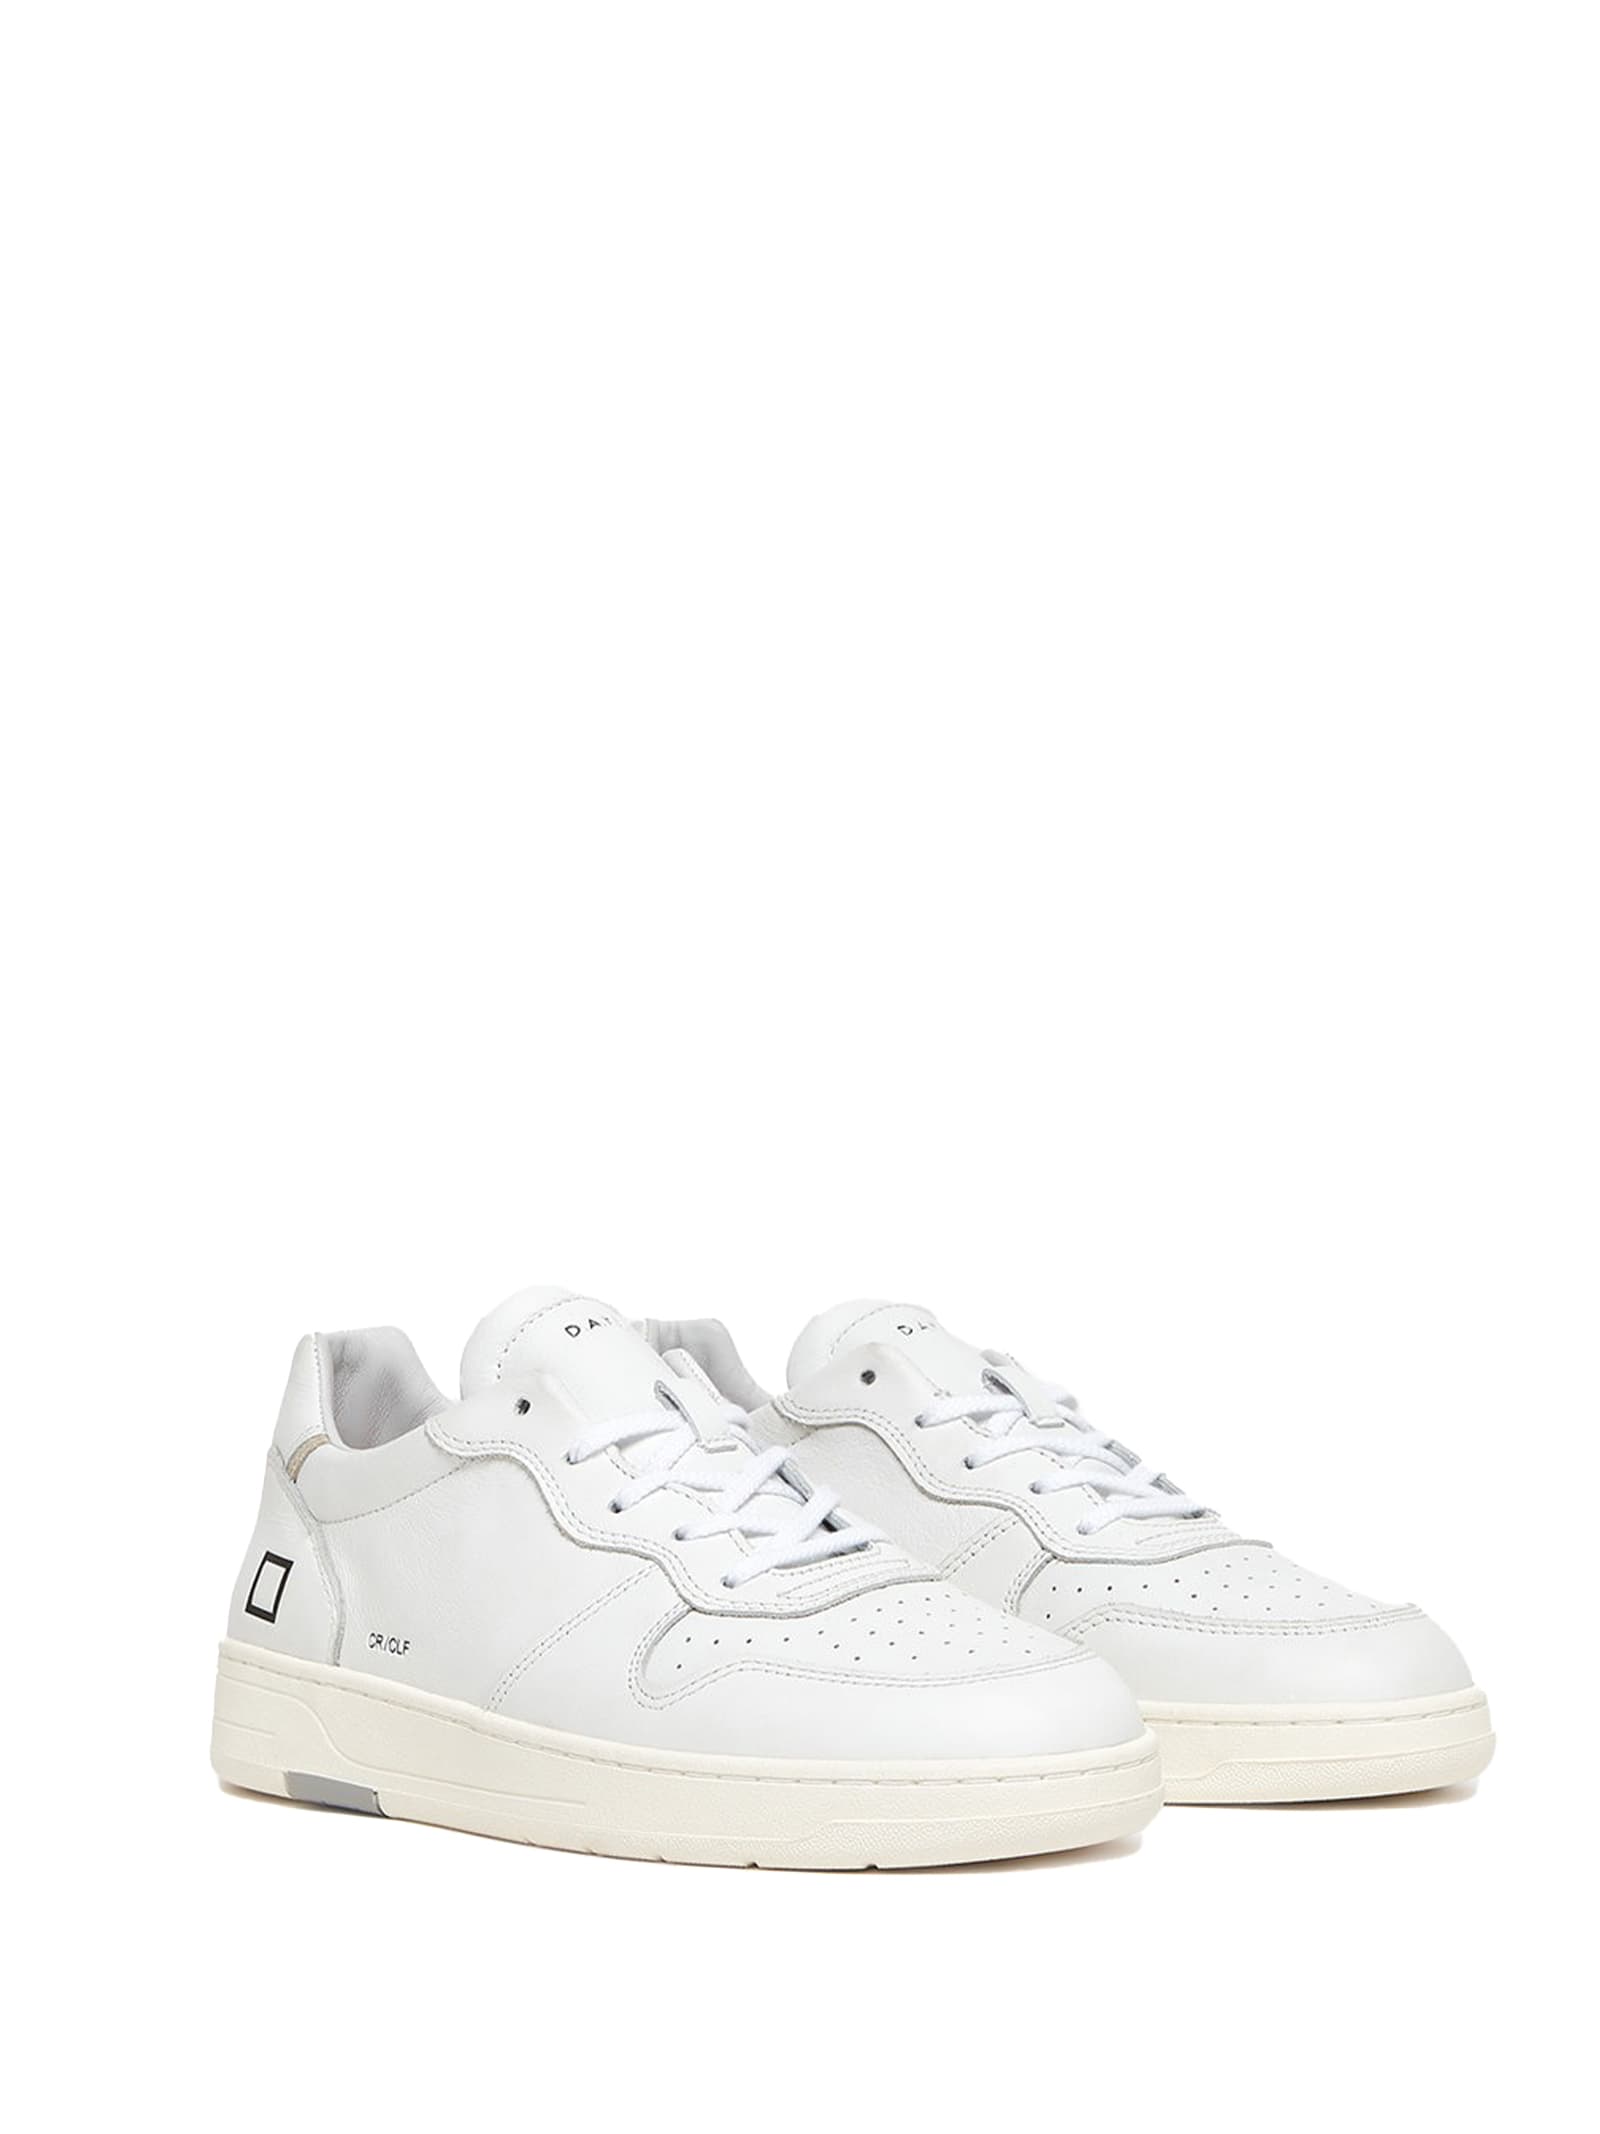 Shop Date Court Mens White Leather Sneaker